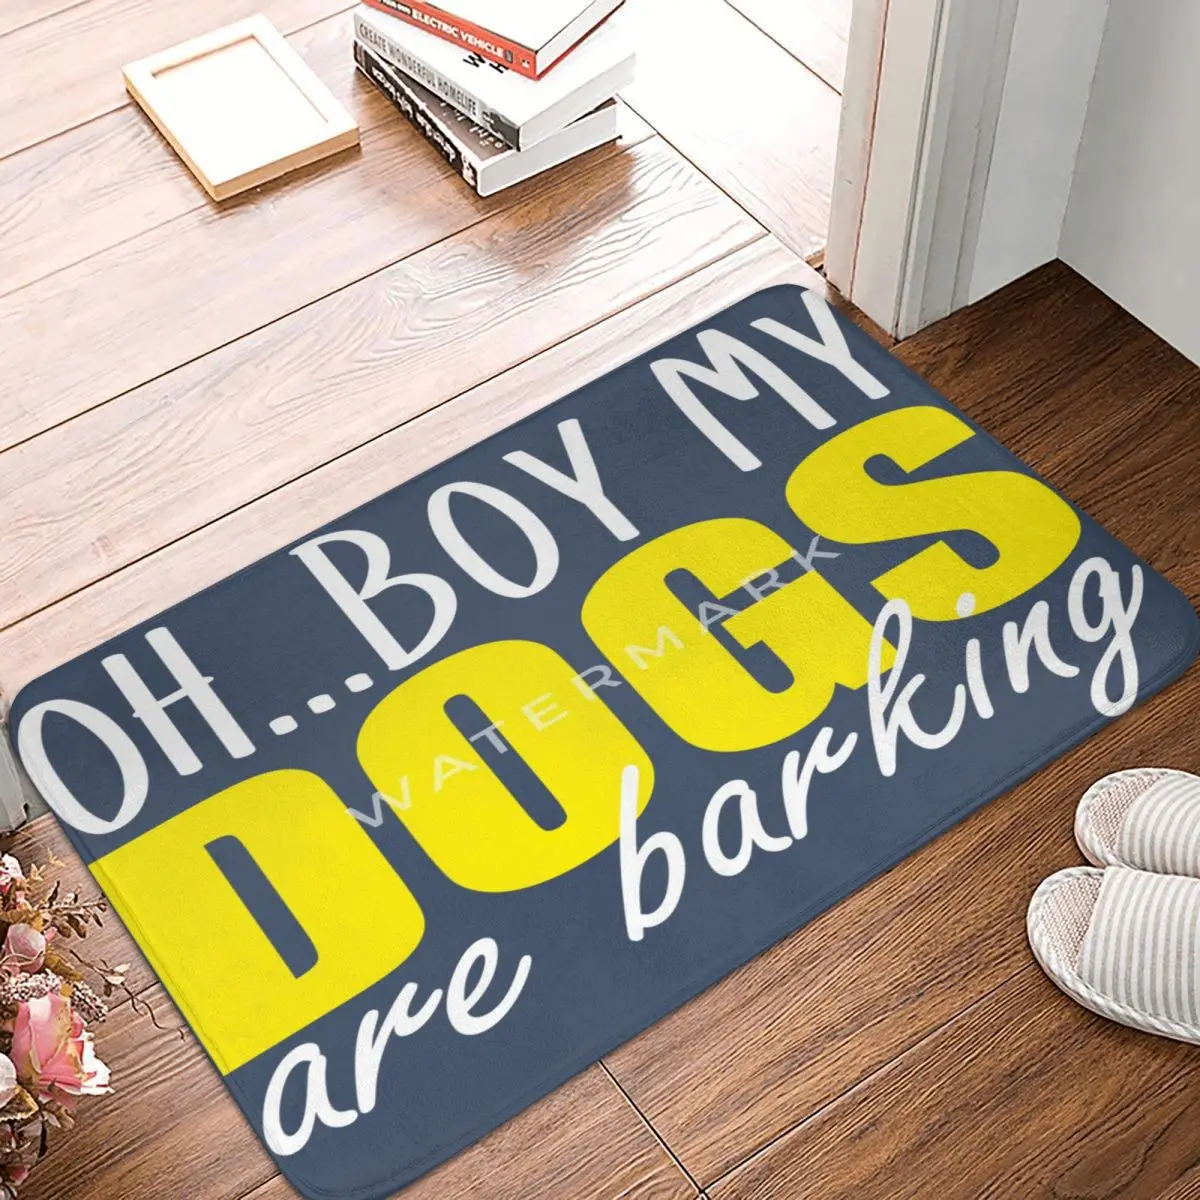 

Oh Boy My Dogs Are Barking Carpet, Polyester Floor Mats Cute Style Anti-Slip Home Decor Festivle Gifts Mats Customizable